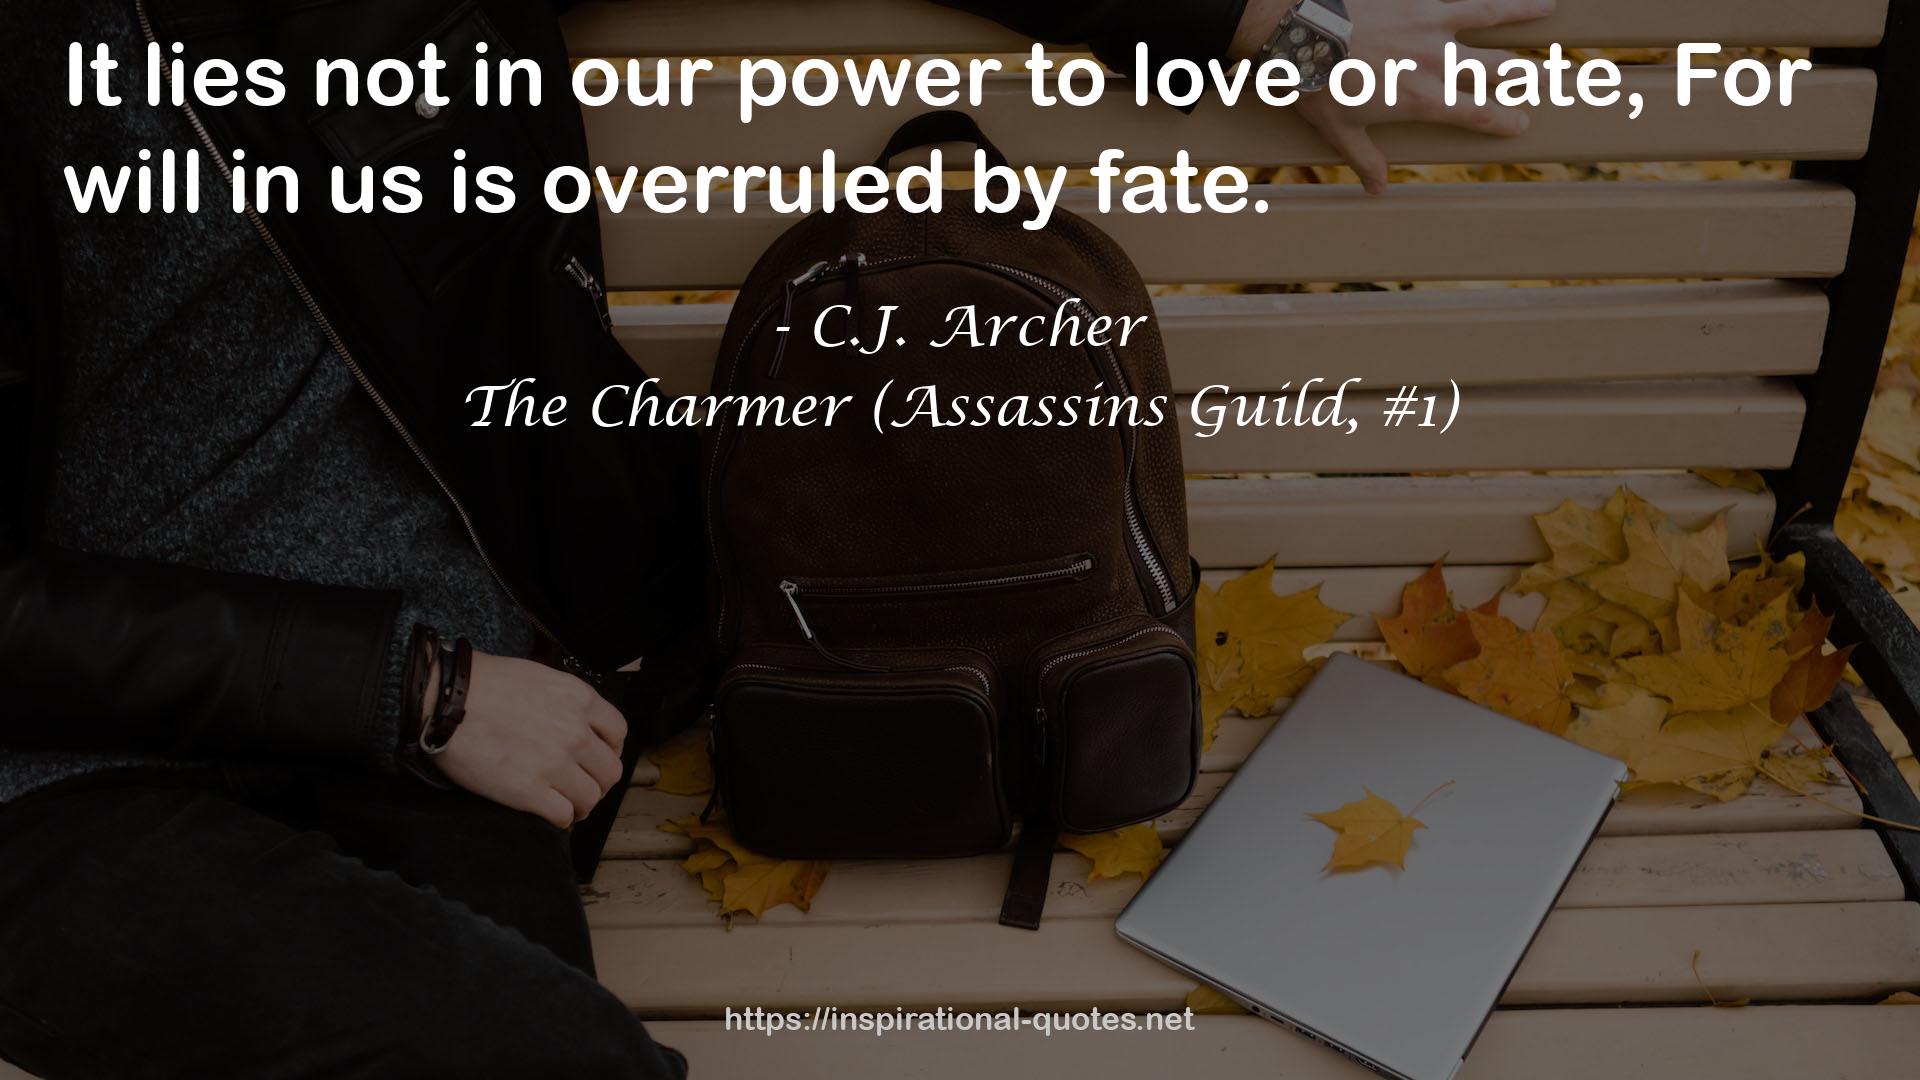 The Charmer (Assassins Guild, #1) QUOTES